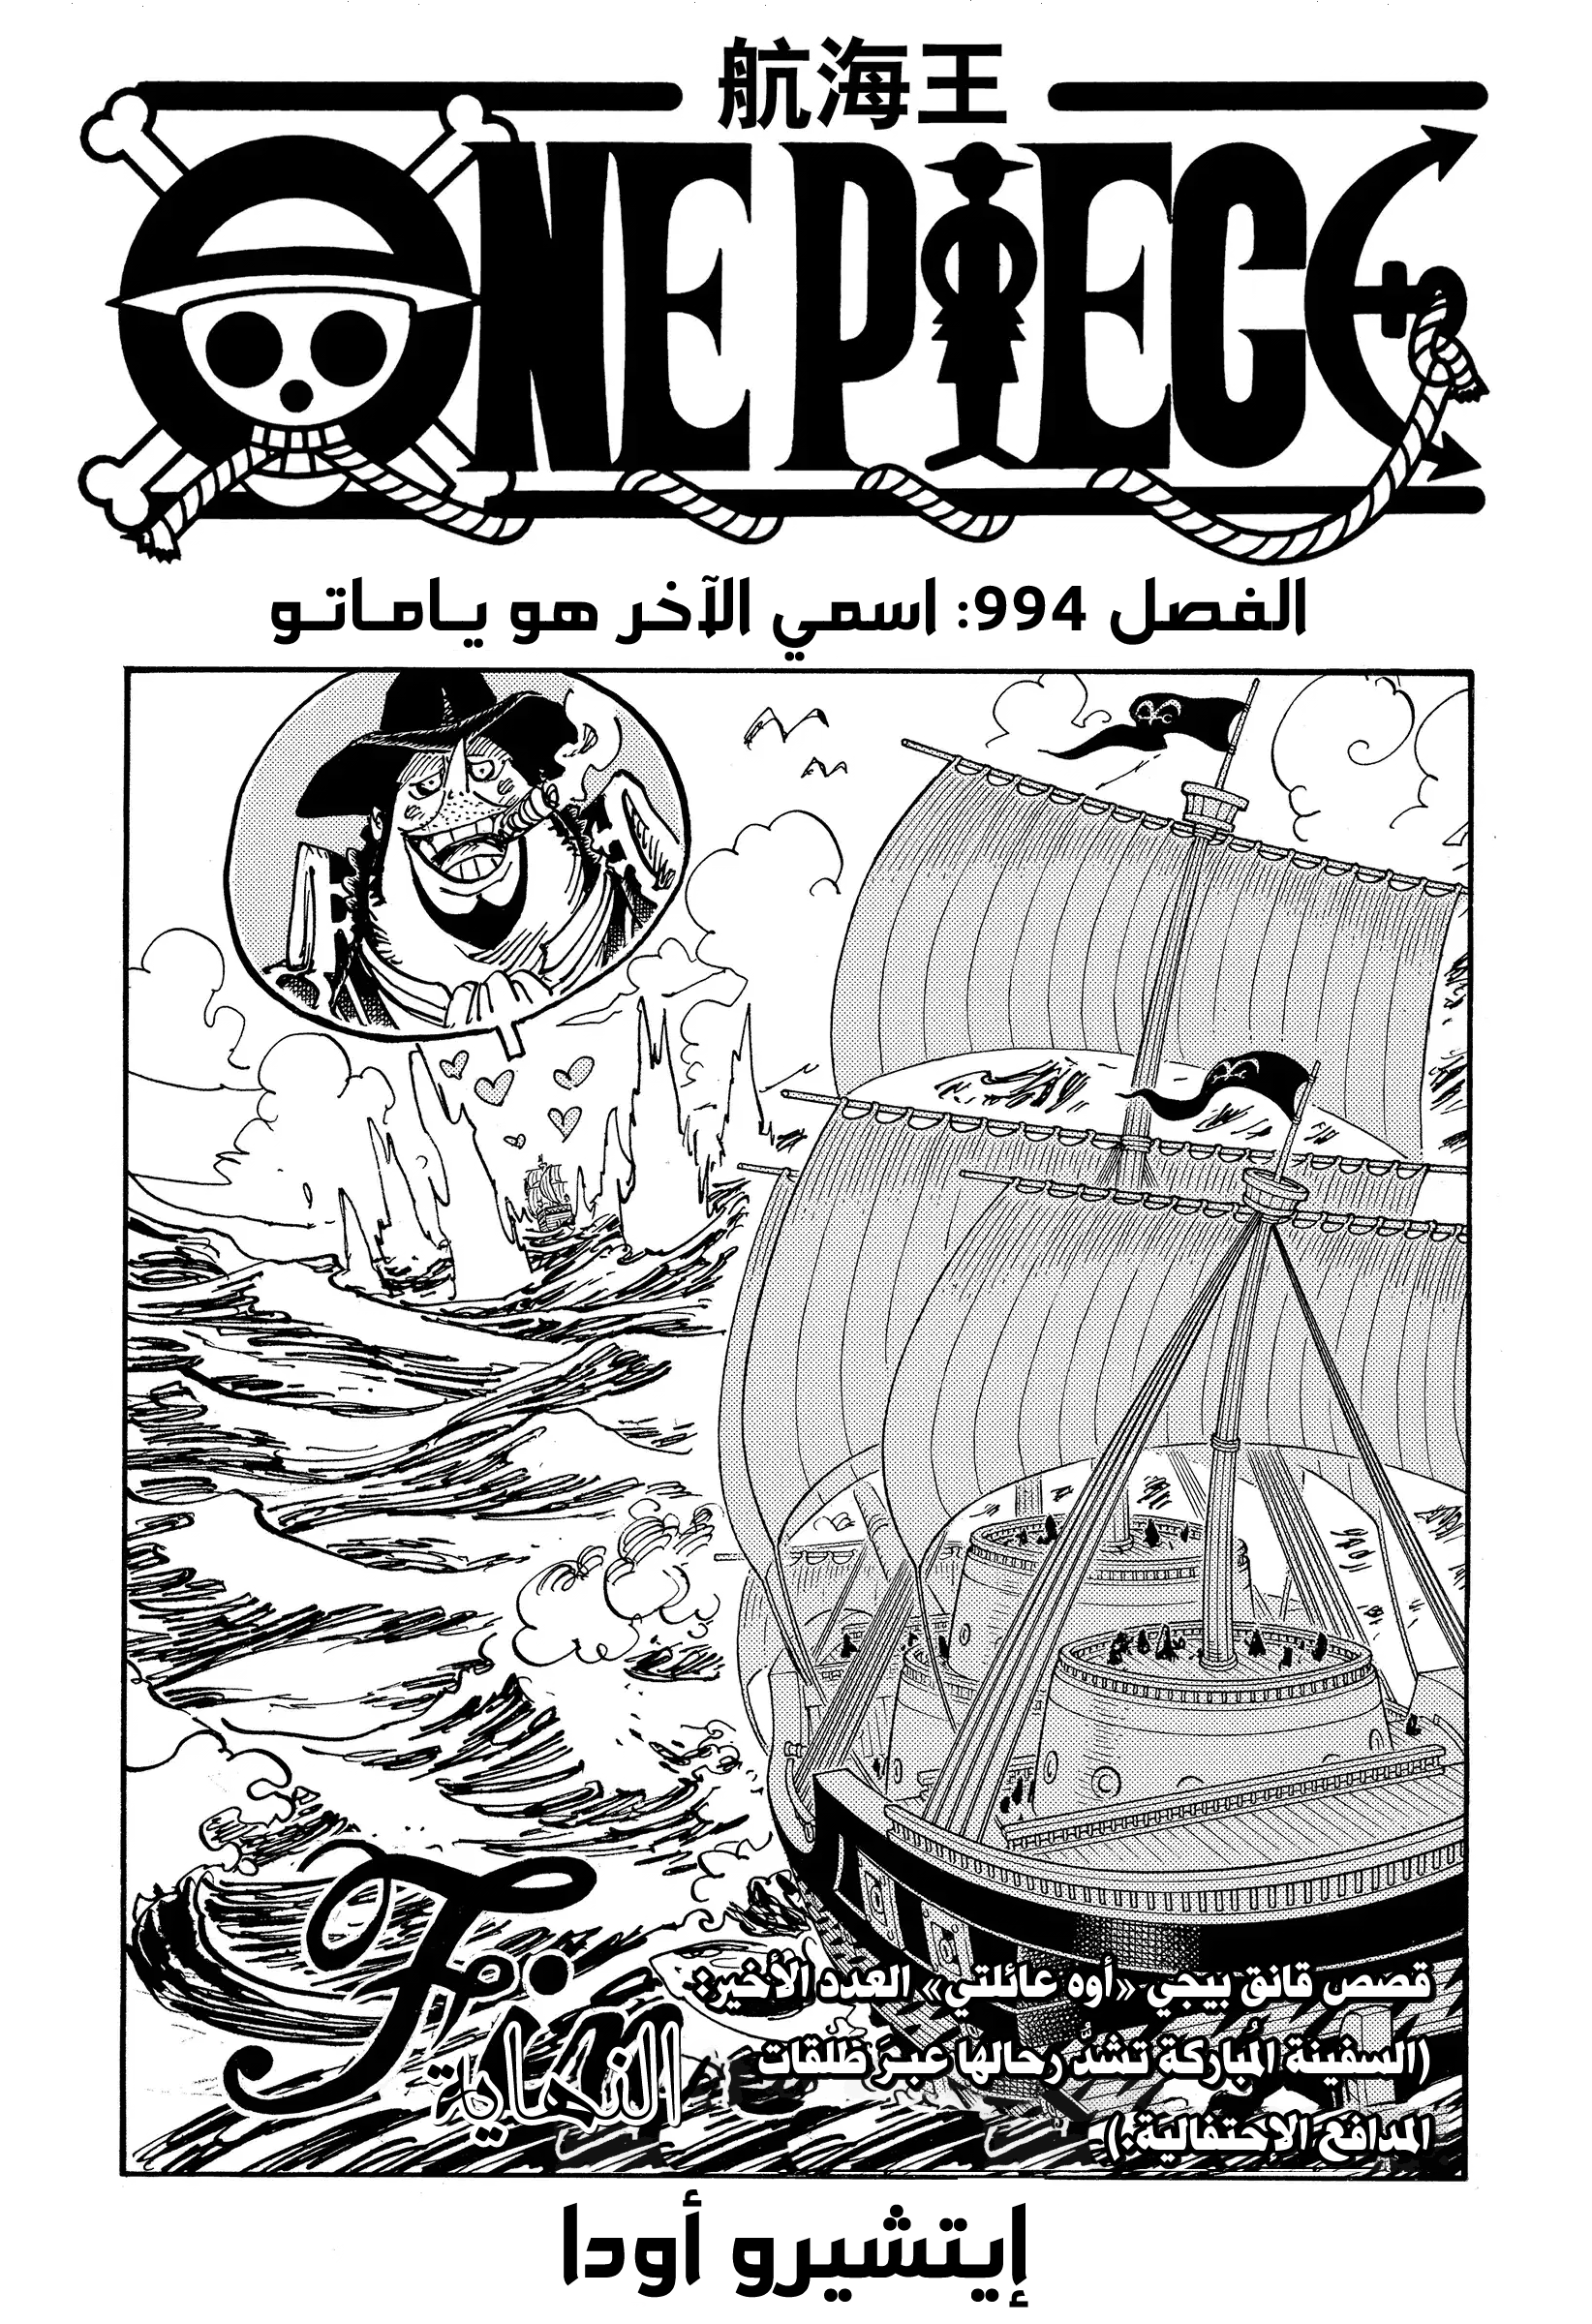 One Piece: Chapter 994 - Page 1